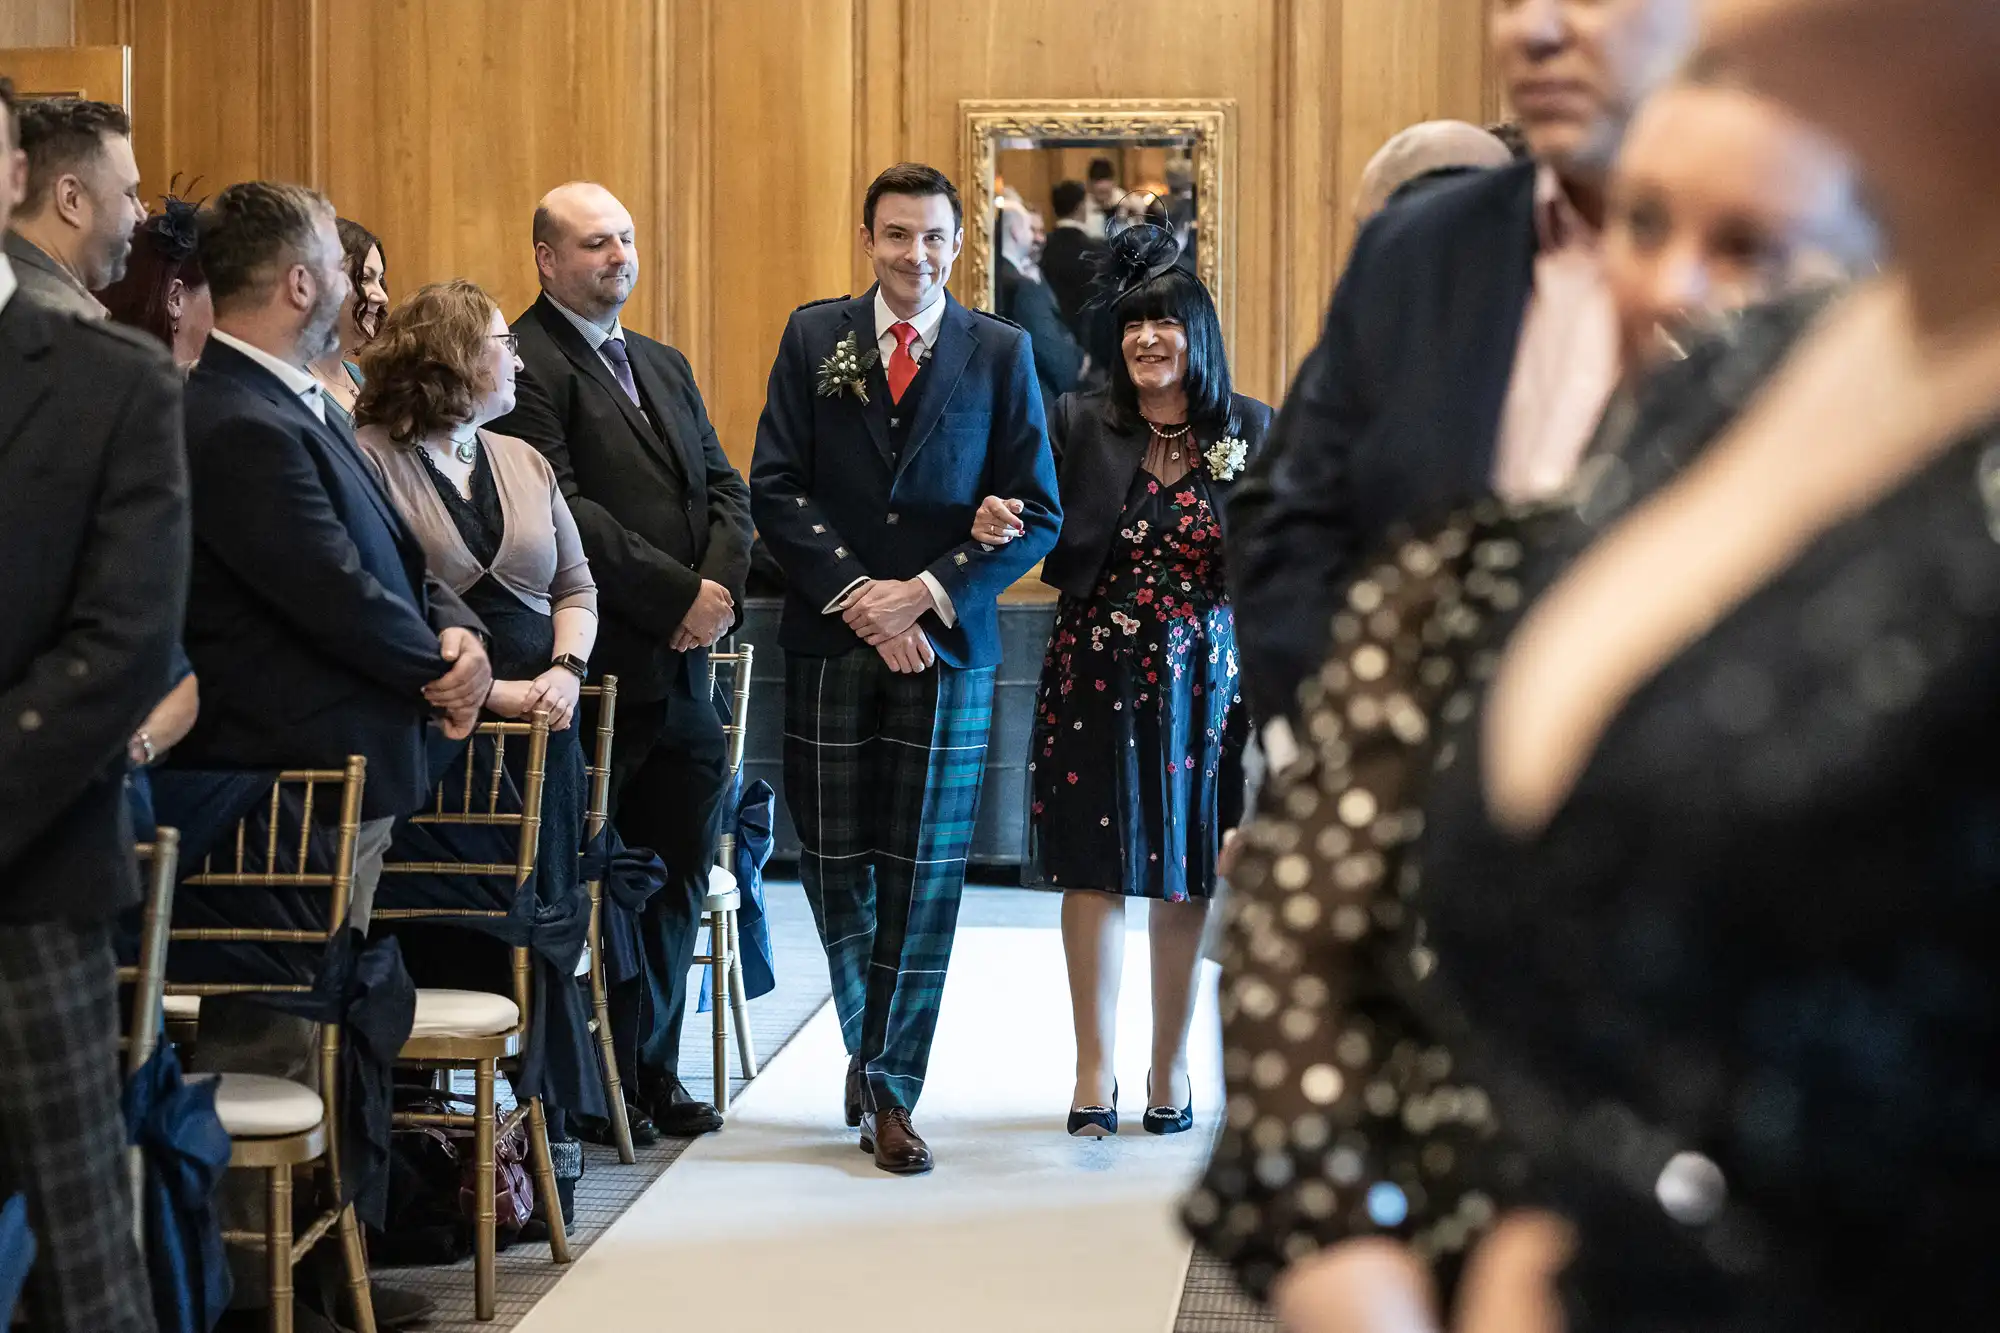 A man in a suit and plaid pants walks down an aisle with an older woman in a gown. They are surrounded by seated guests in a wooden paneled room.